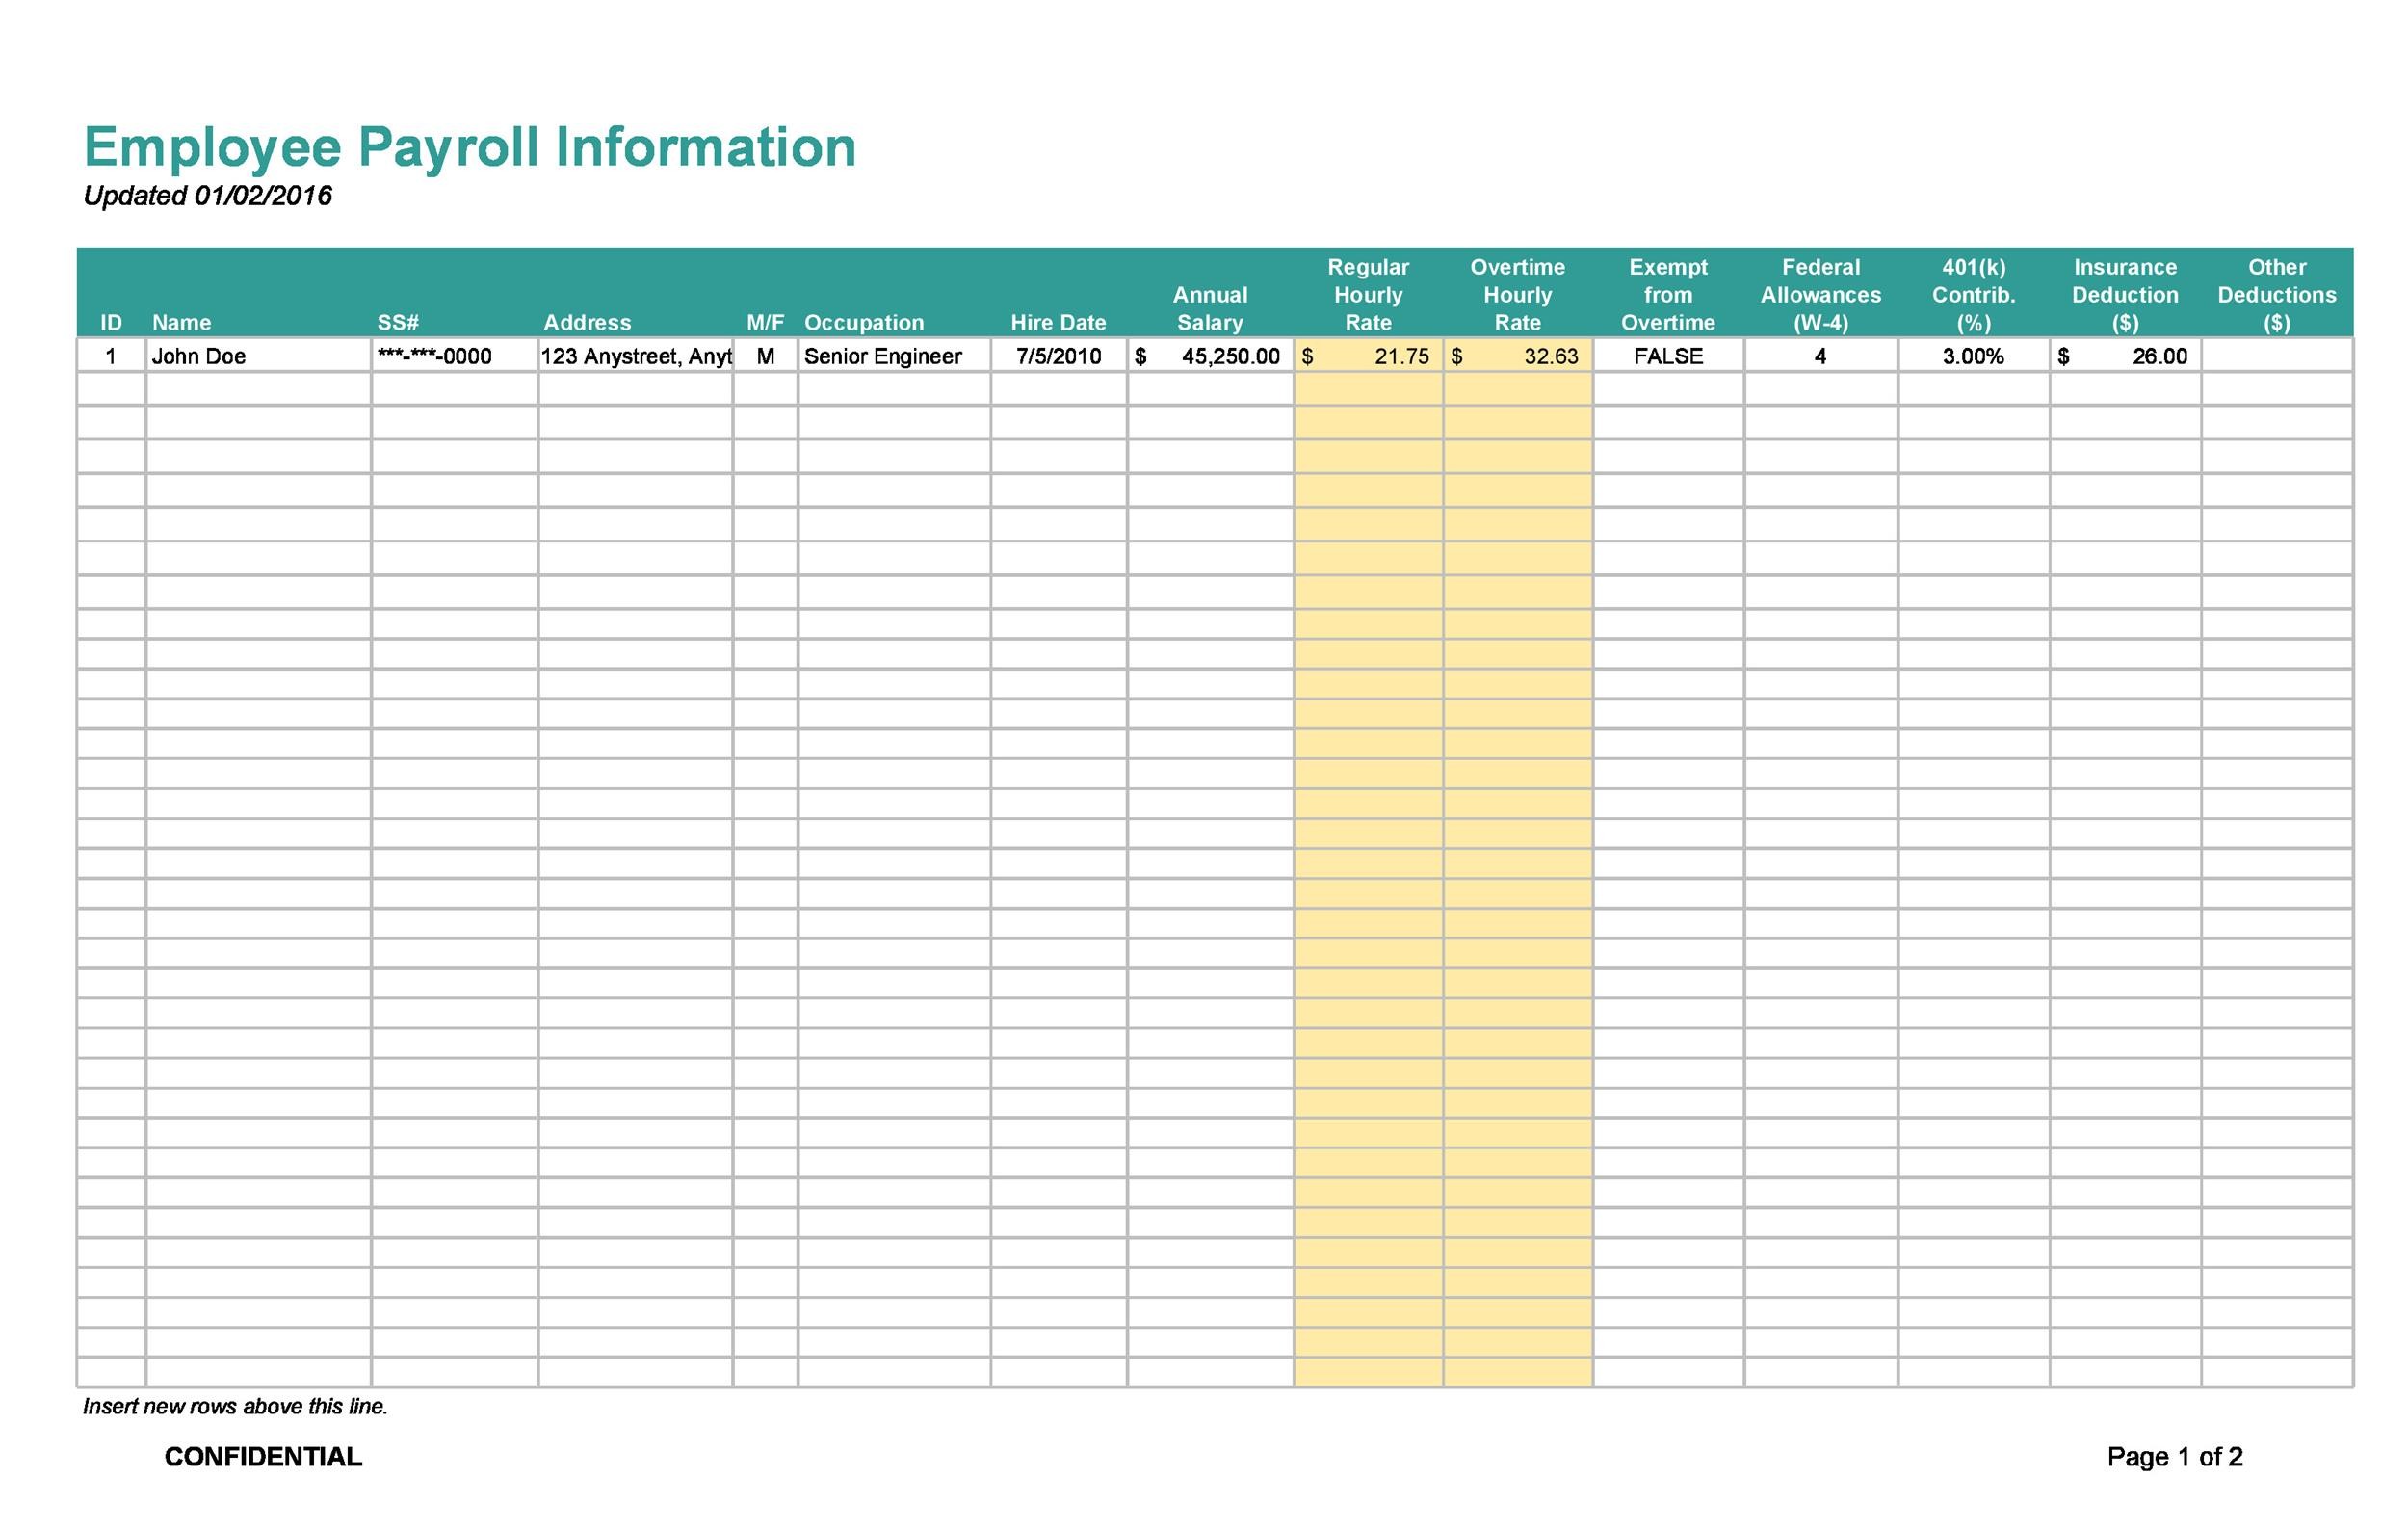 Employee Payroll Information in Excel sheet